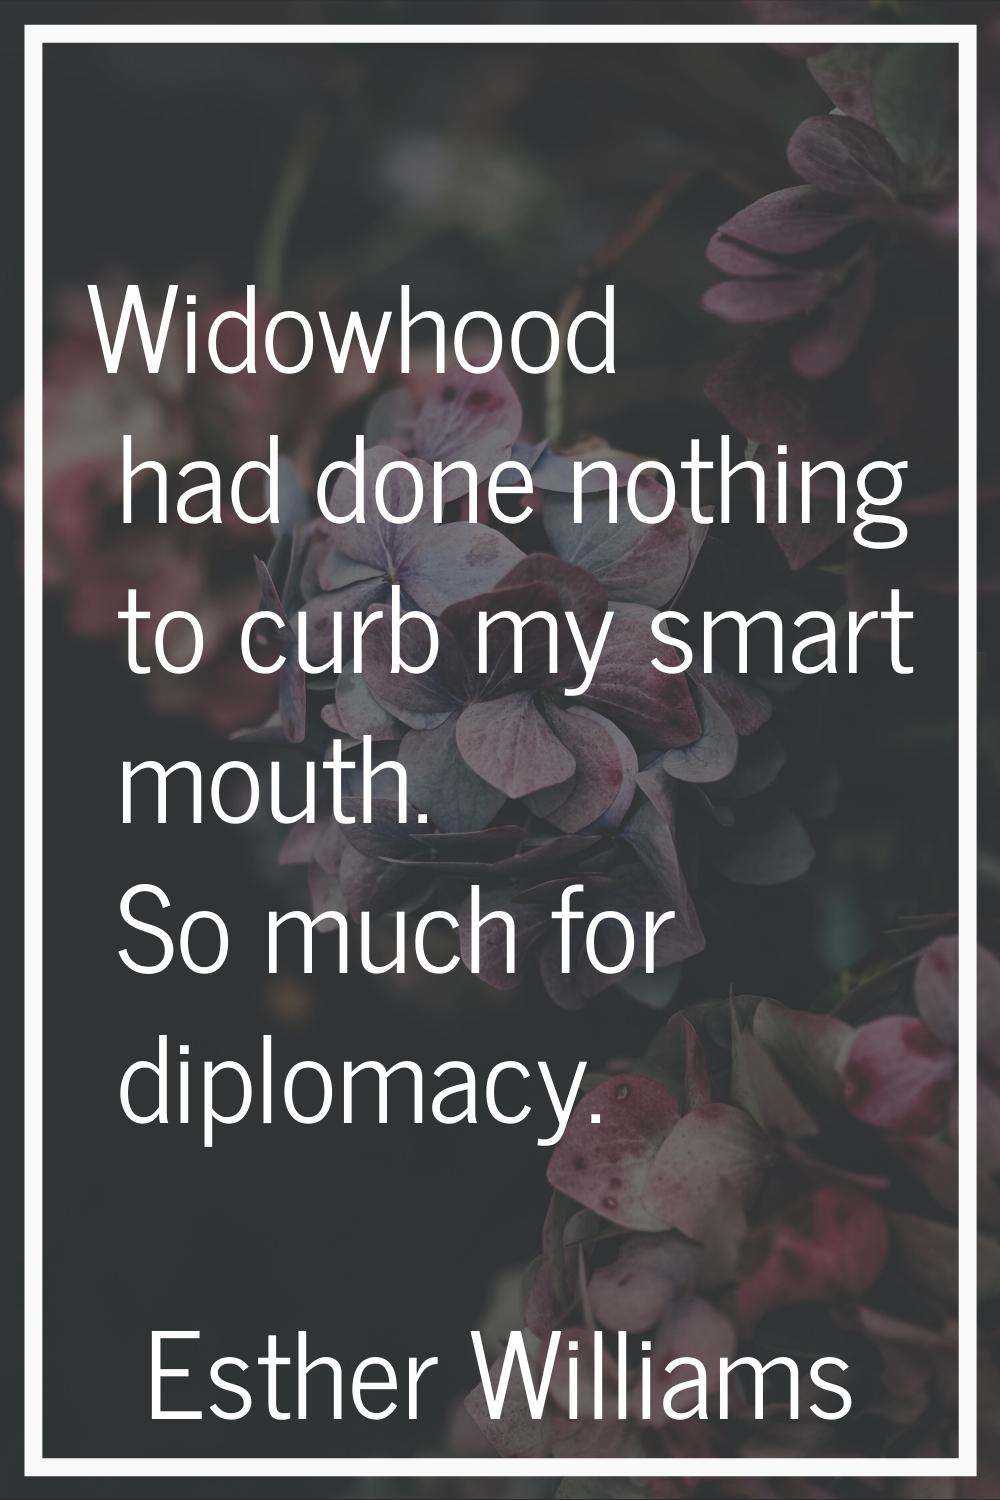 Widowhood had done nothing to curb my smart mouth. So much for diplomacy.